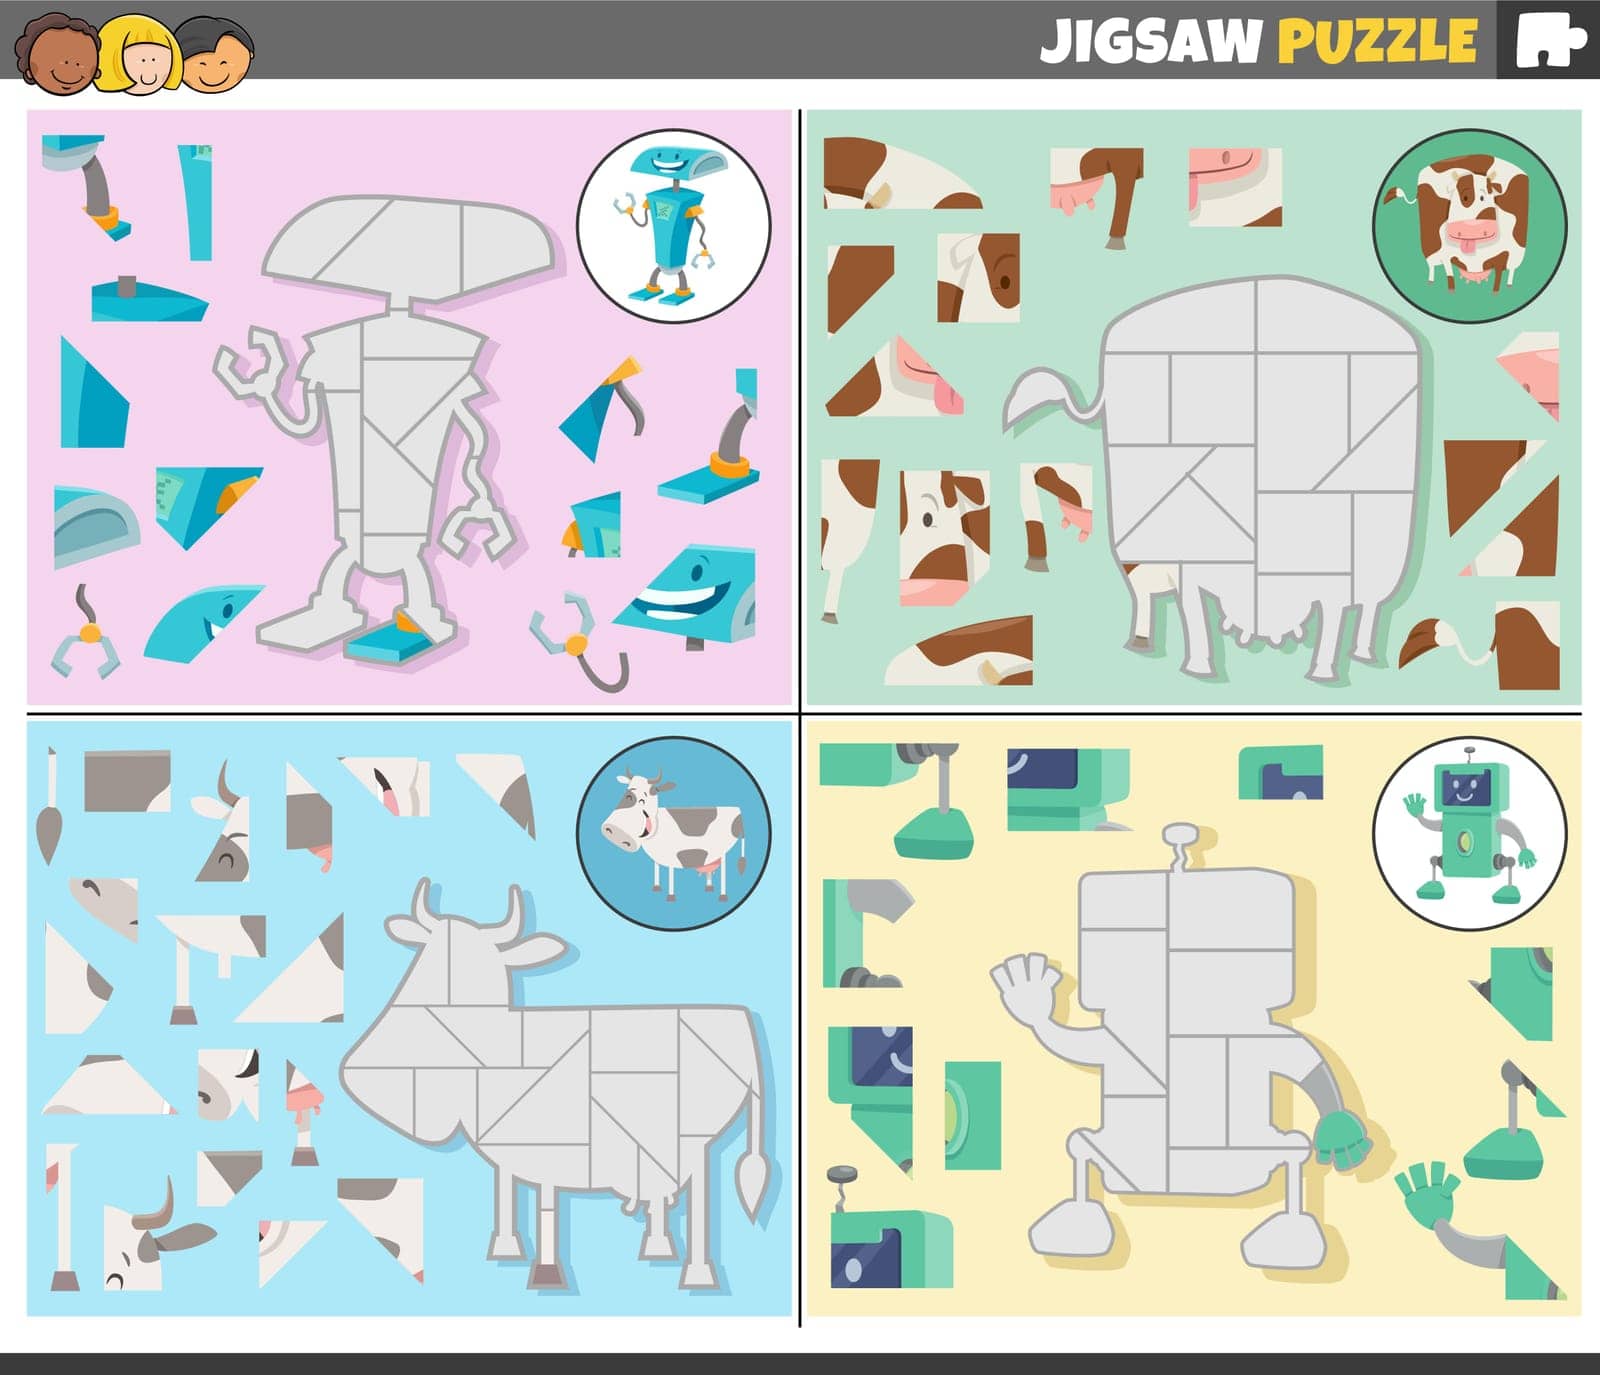 Cartoon illustration of educational jigsaw puzzle games set with robots and cows characters